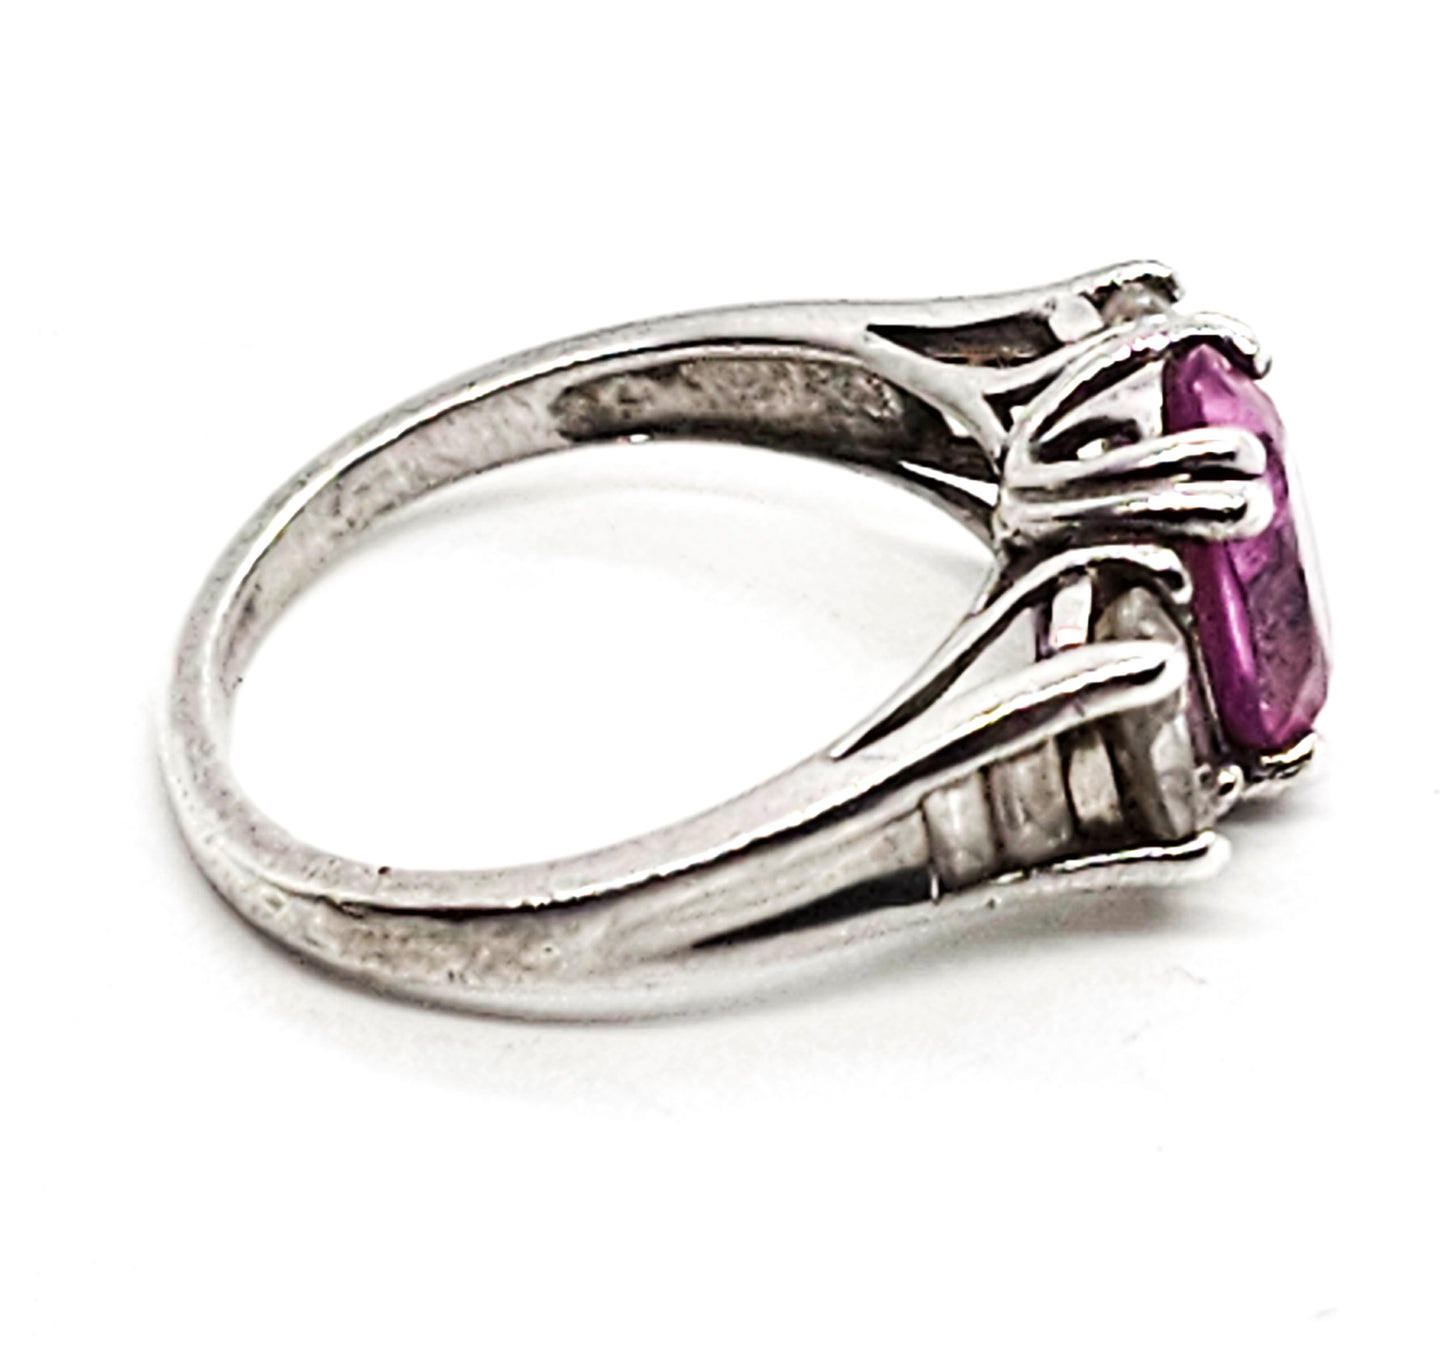 Pink and white Sapphire three stone vintage sterling silver ring size 7